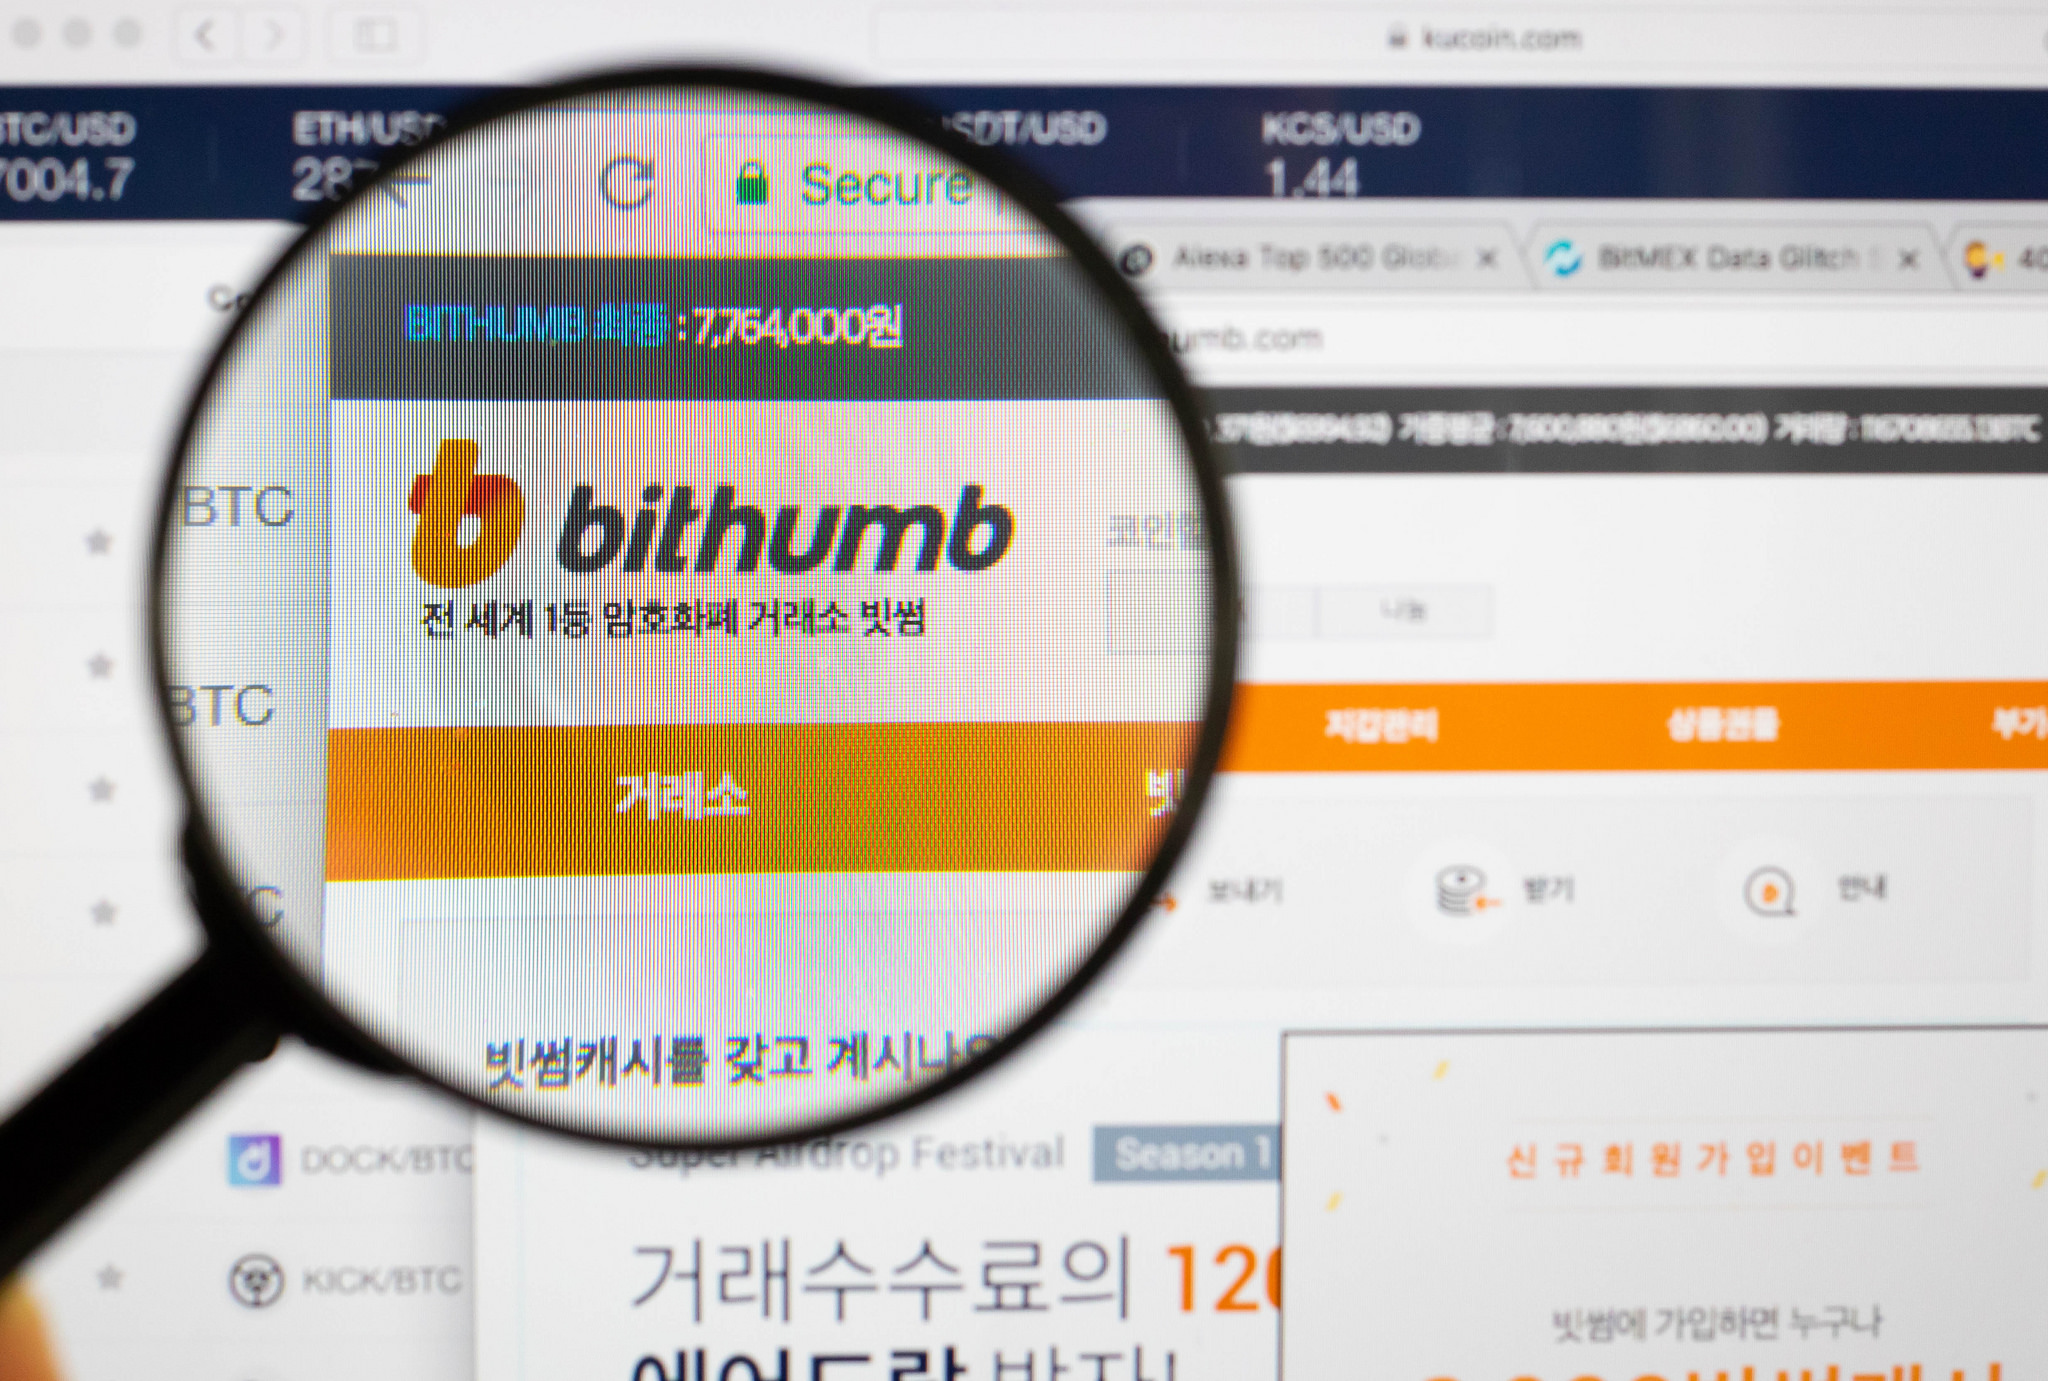 Bithumb Crypto Exchange Scam Uncovered by Crafty Schemer Earns $90,000 Per Day